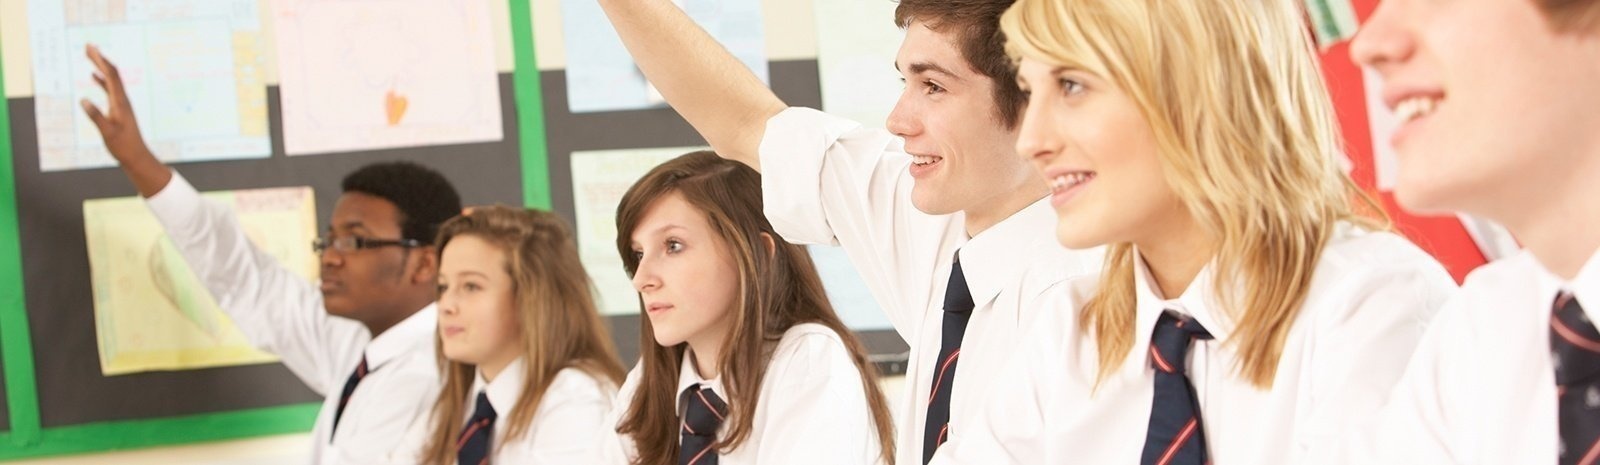   Secondary Schools  Our training course package that has been specifically developed for children and young people between the ages of 11 and 18.  Read more